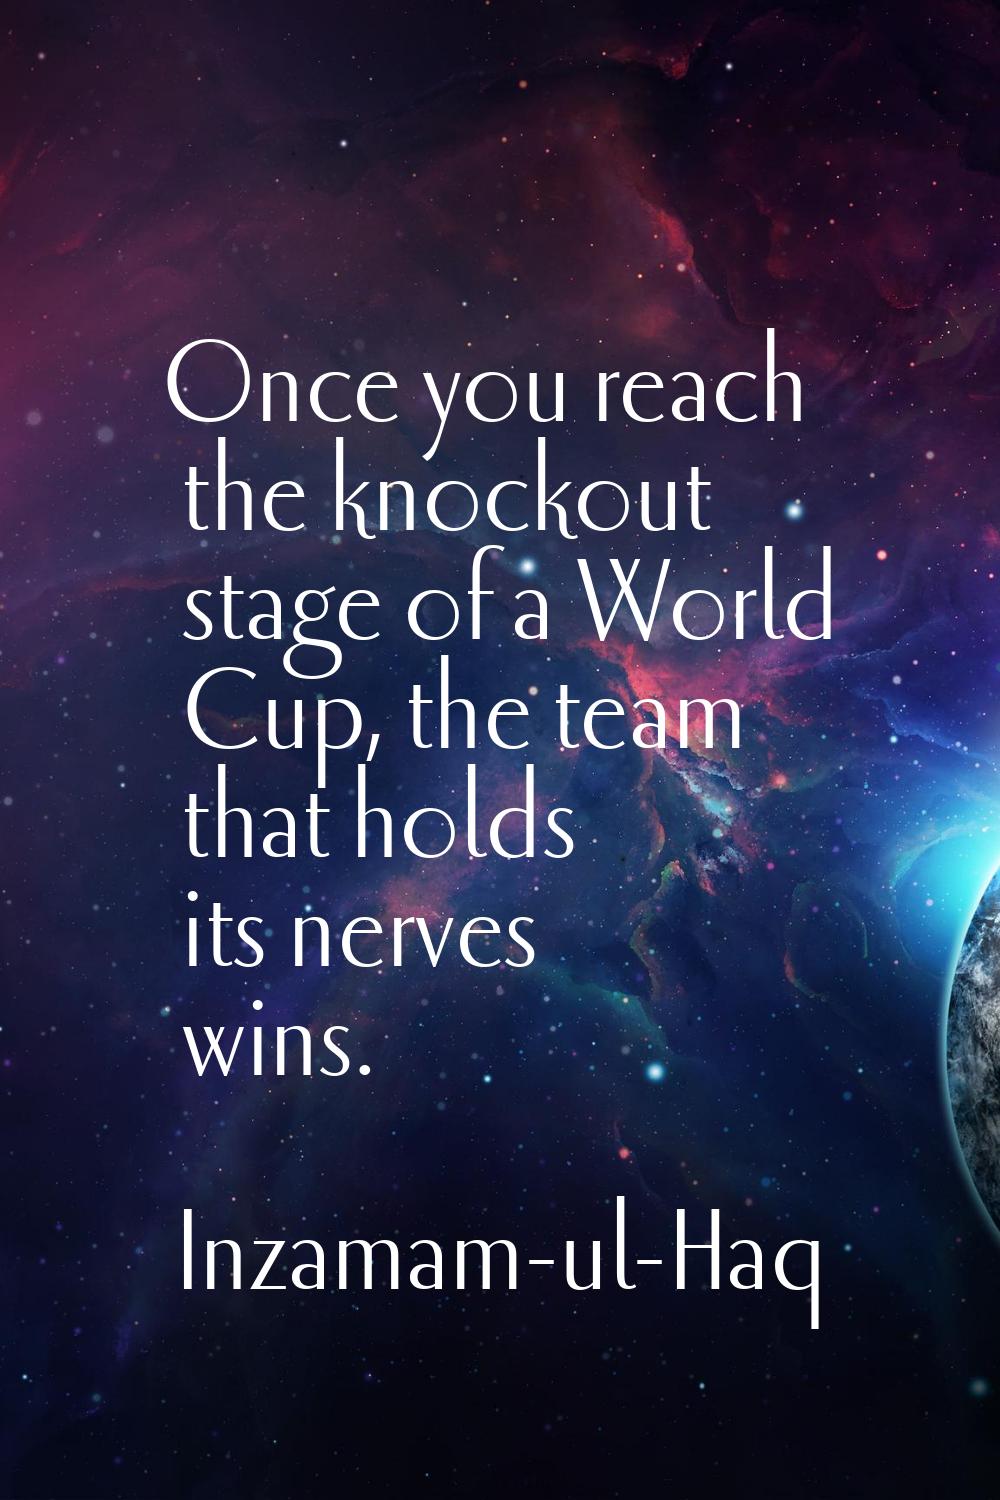 Once you reach the knockout stage of a World Cup, the team that holds its nerves wins.